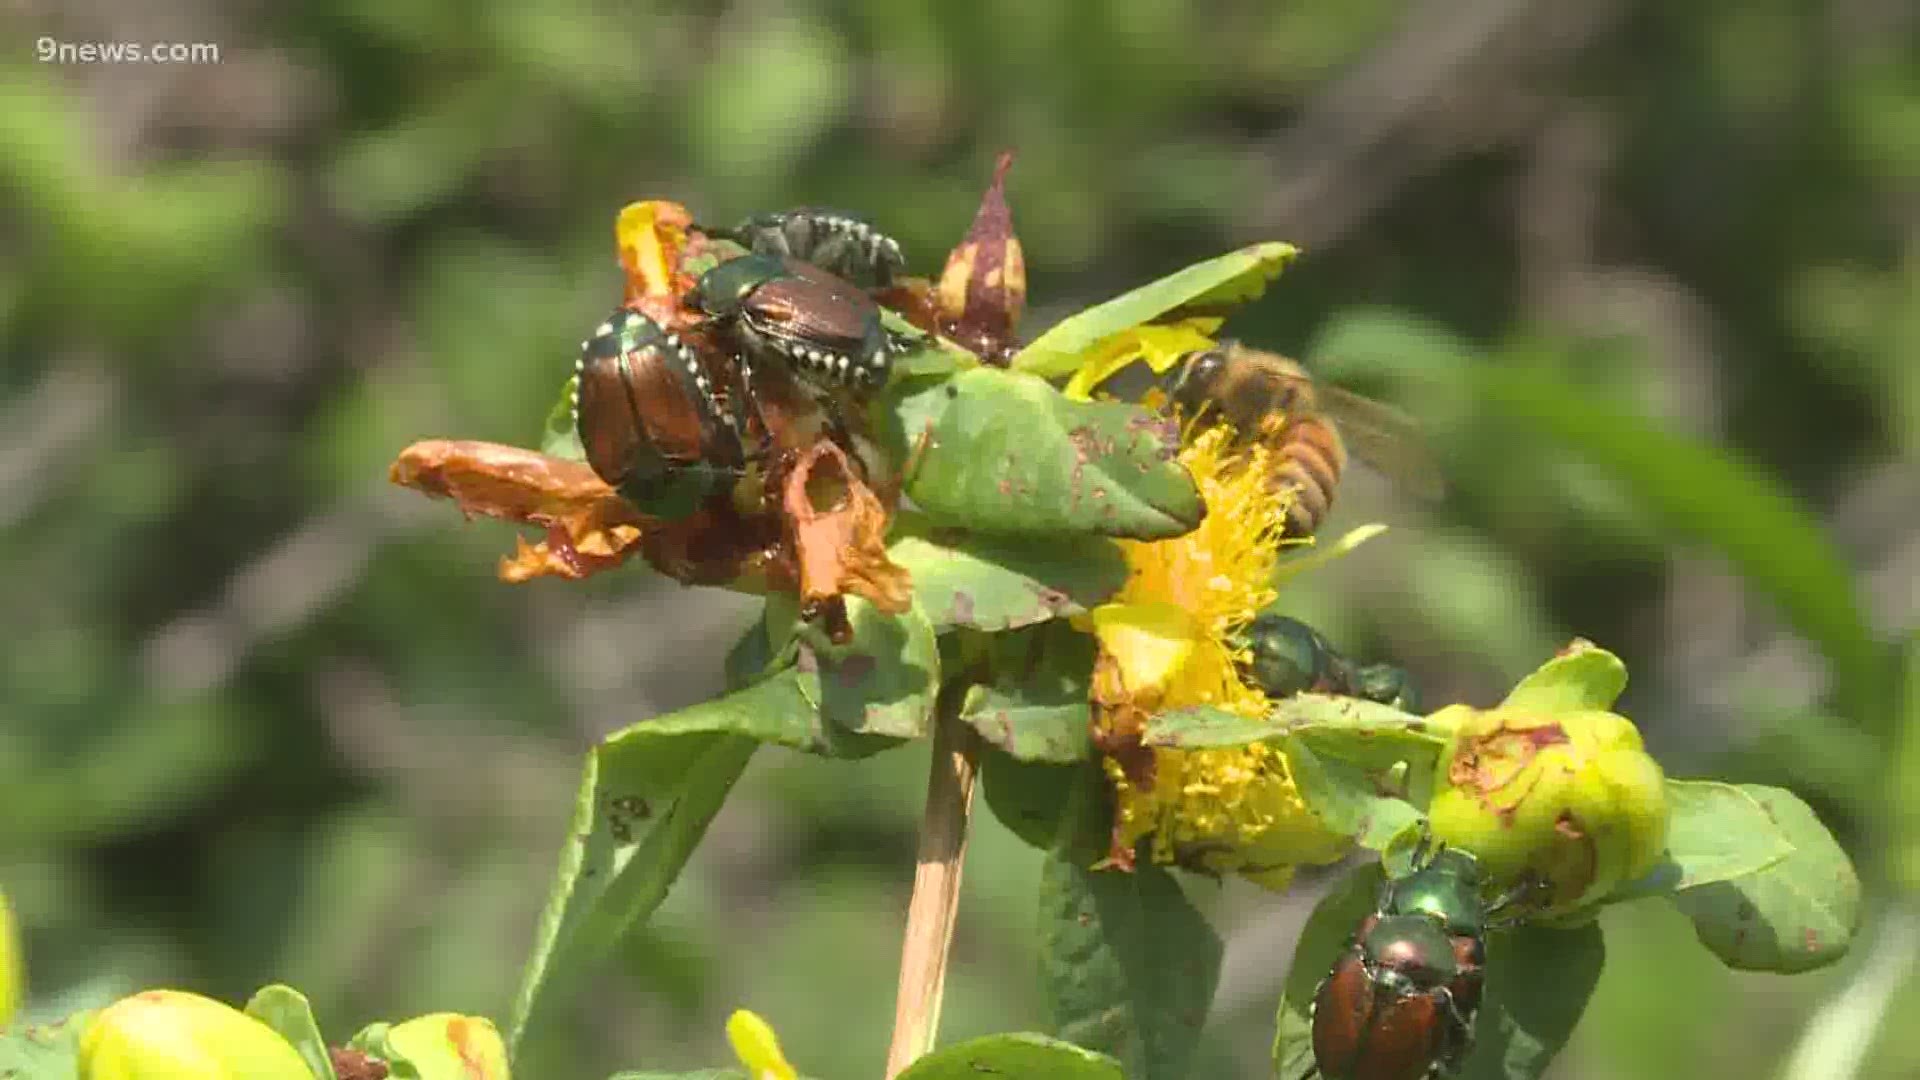 There are multiple strategies for taking on Japanese beetles, but some are more harmful than others.